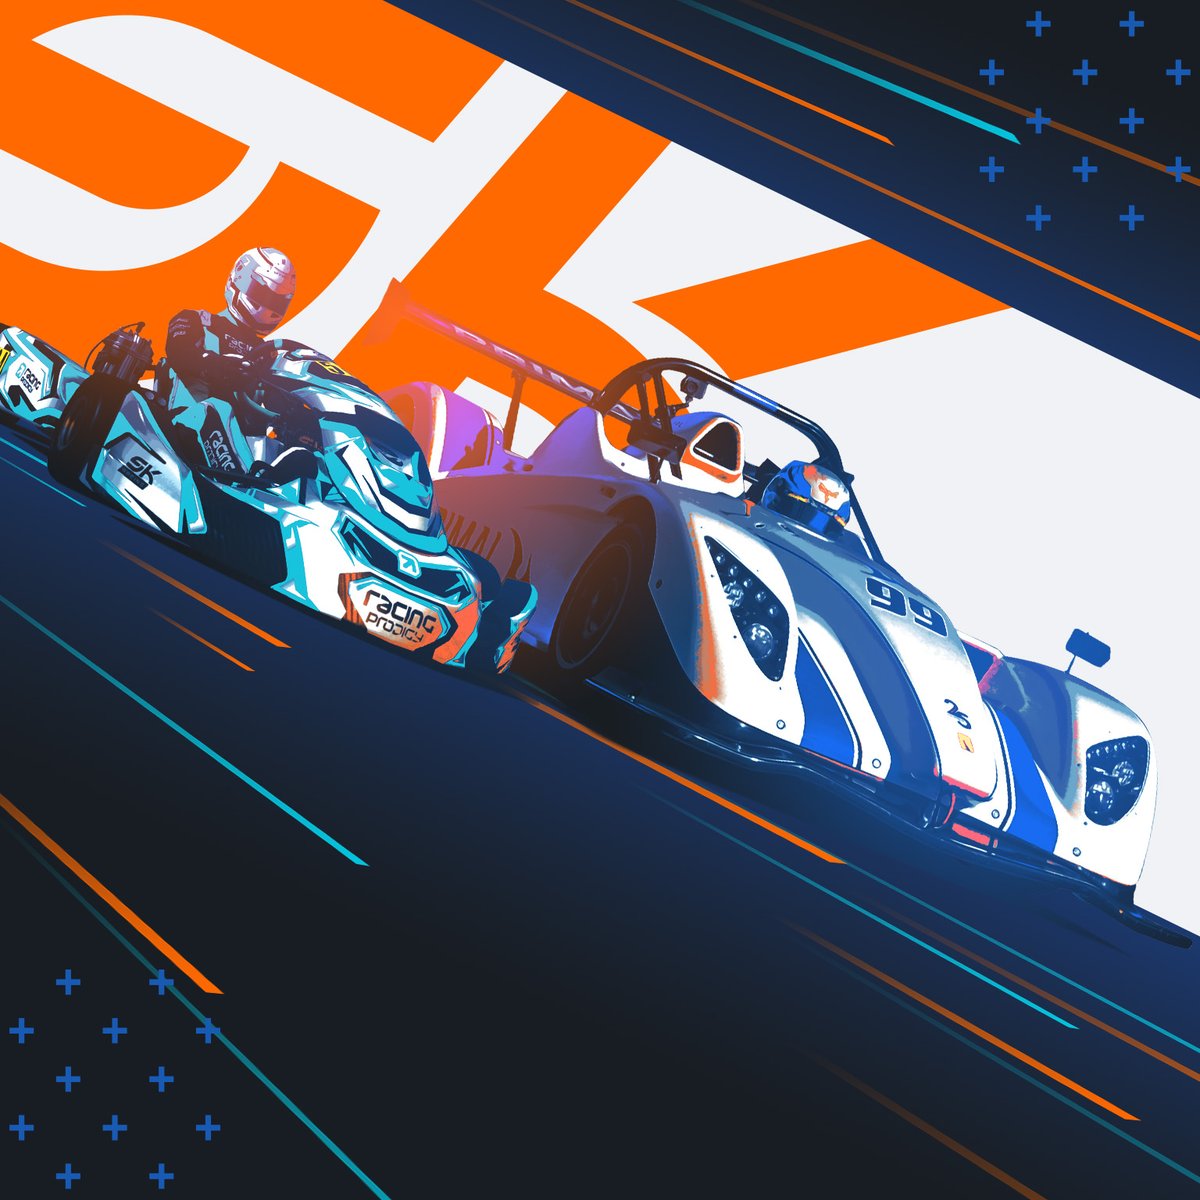 Not everyone has the space or budget for a sim rig. Racing Prodigy believes that there's driving talent to discover at every corner - INCLUDING MOBILE. New announcement with @streetkart coming soon!

#streetkart #mobilegaming #kartracing #karting #karting #iosgaming